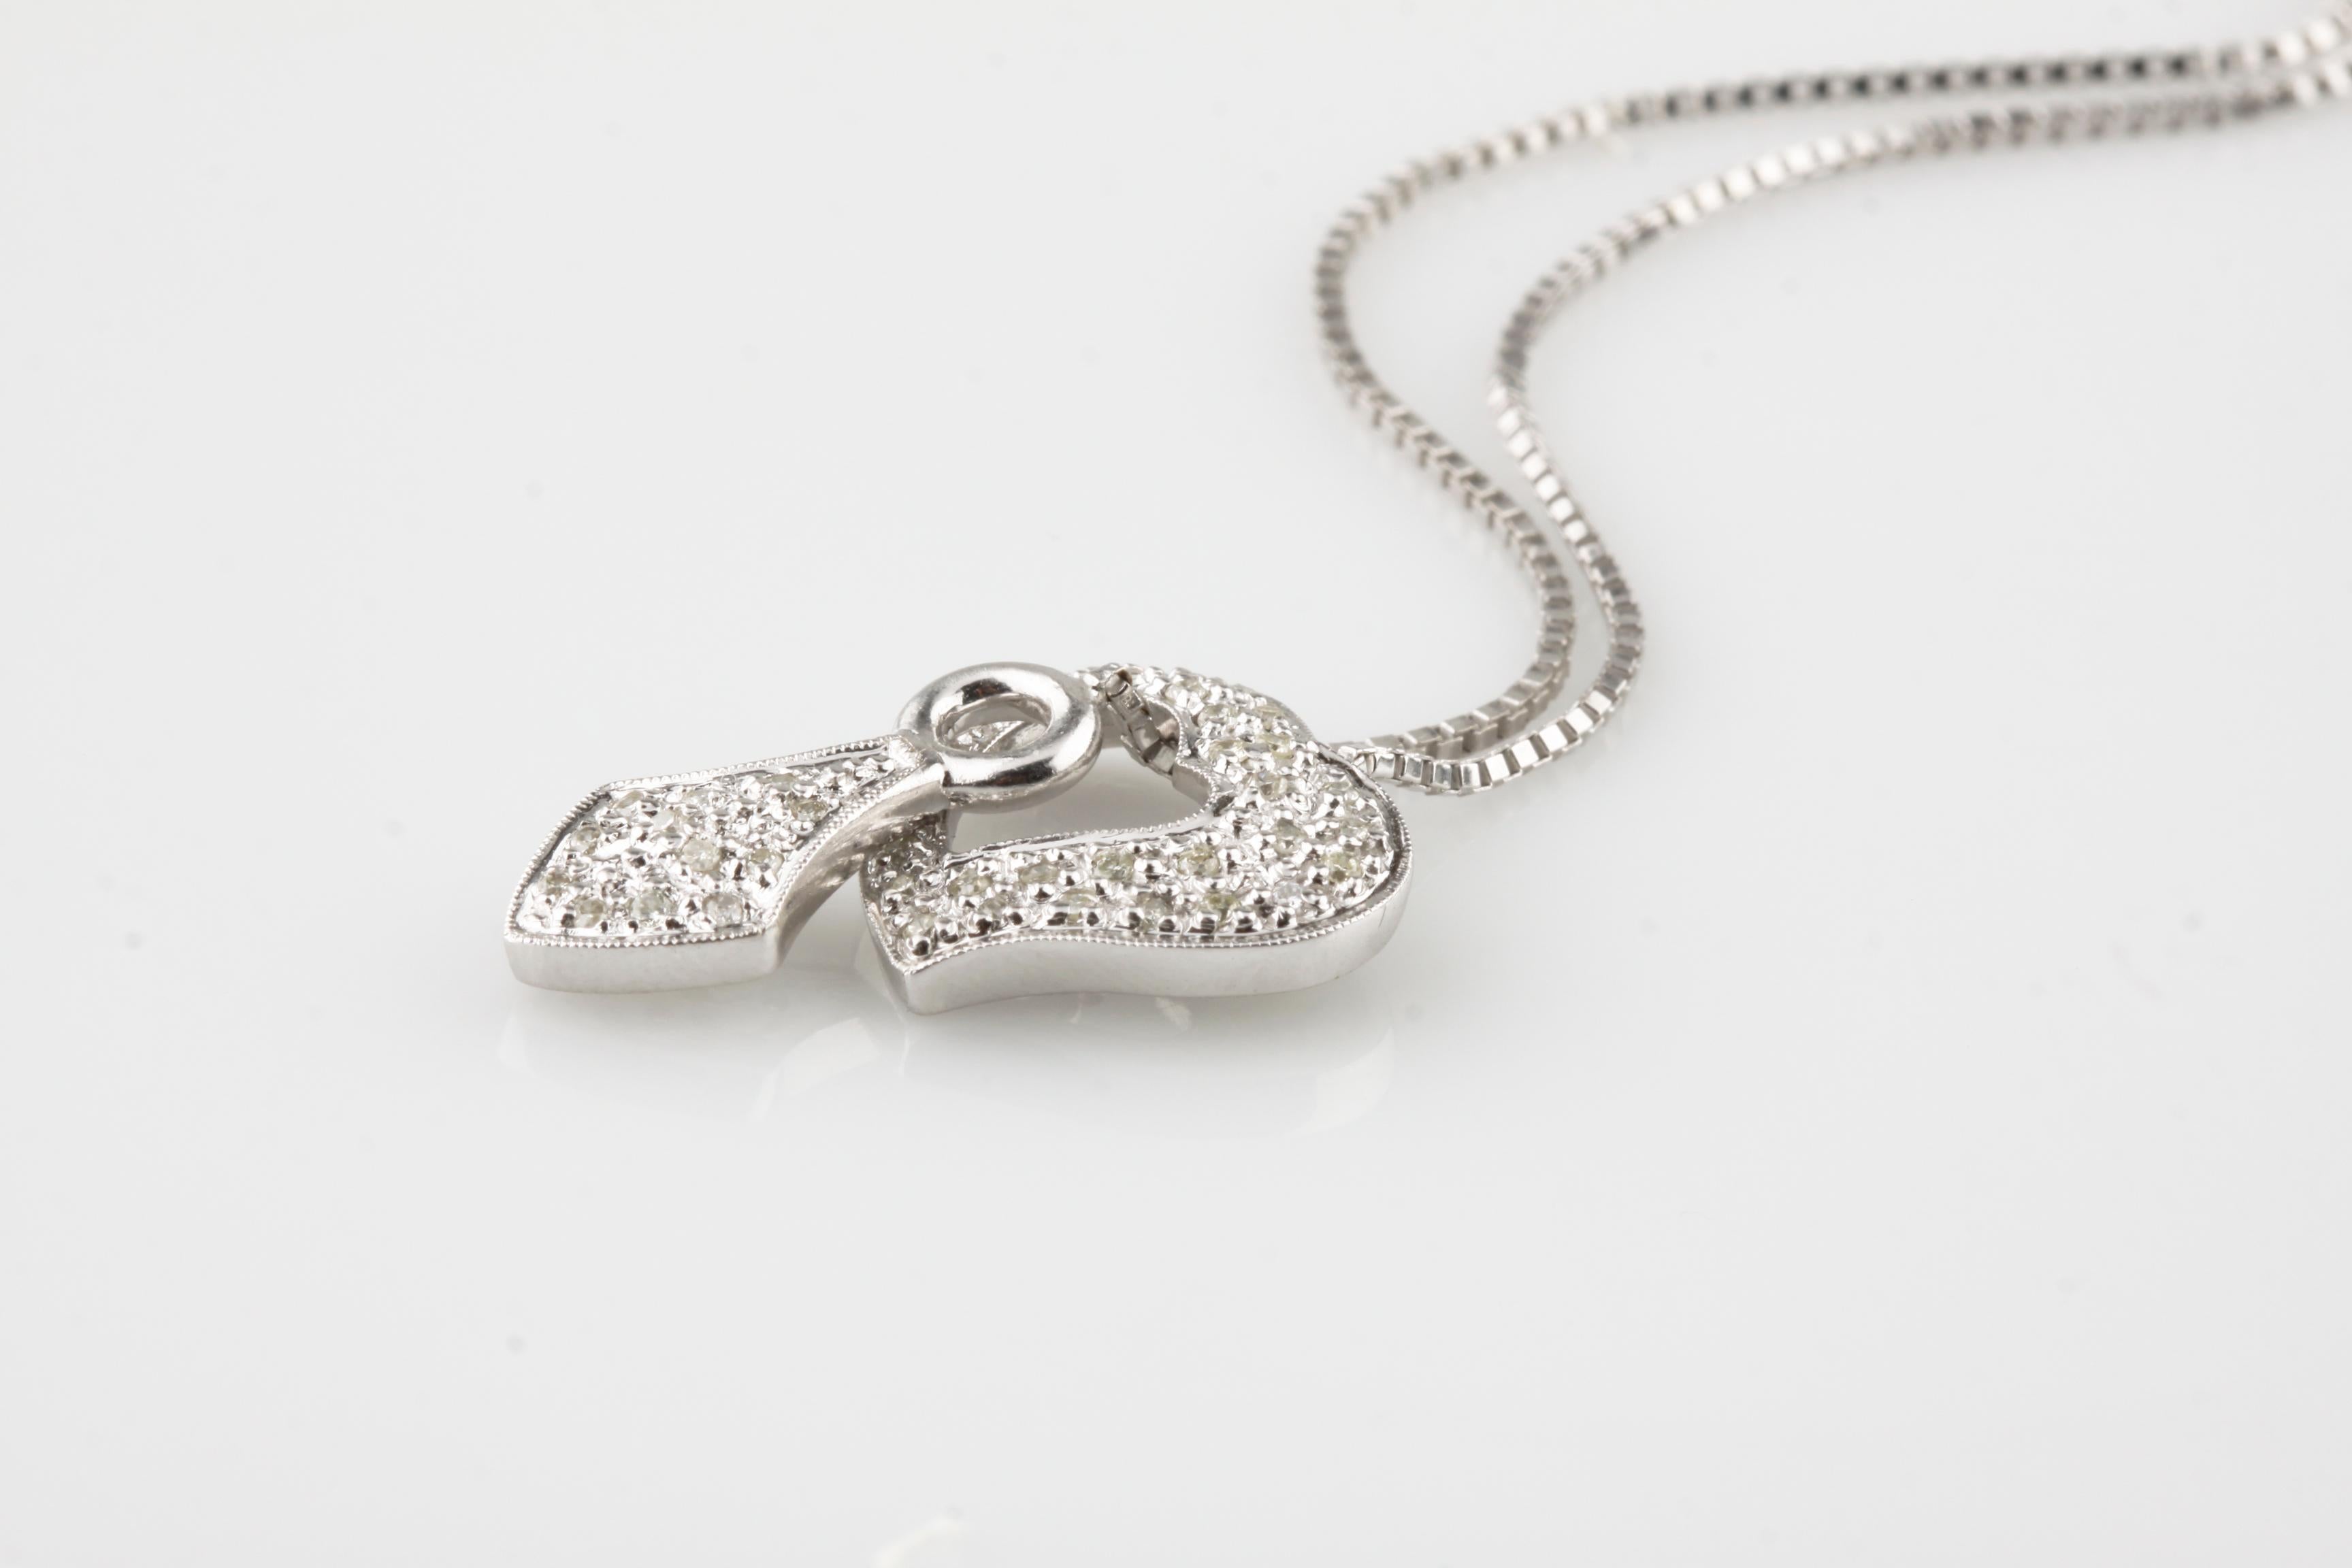 Gorgeous, Unique Lariat Necklace Featuring Asymmetrical Heart & Drop
Both Are Covered in Round Cut Pavé Diamonds
Heart is 16 mm Wide x 15 mm Long
Drop is 8 mm Wide and 18 mm Long (Including Bail)
TDW = Approximately 0.22 ct
Average Color = K -